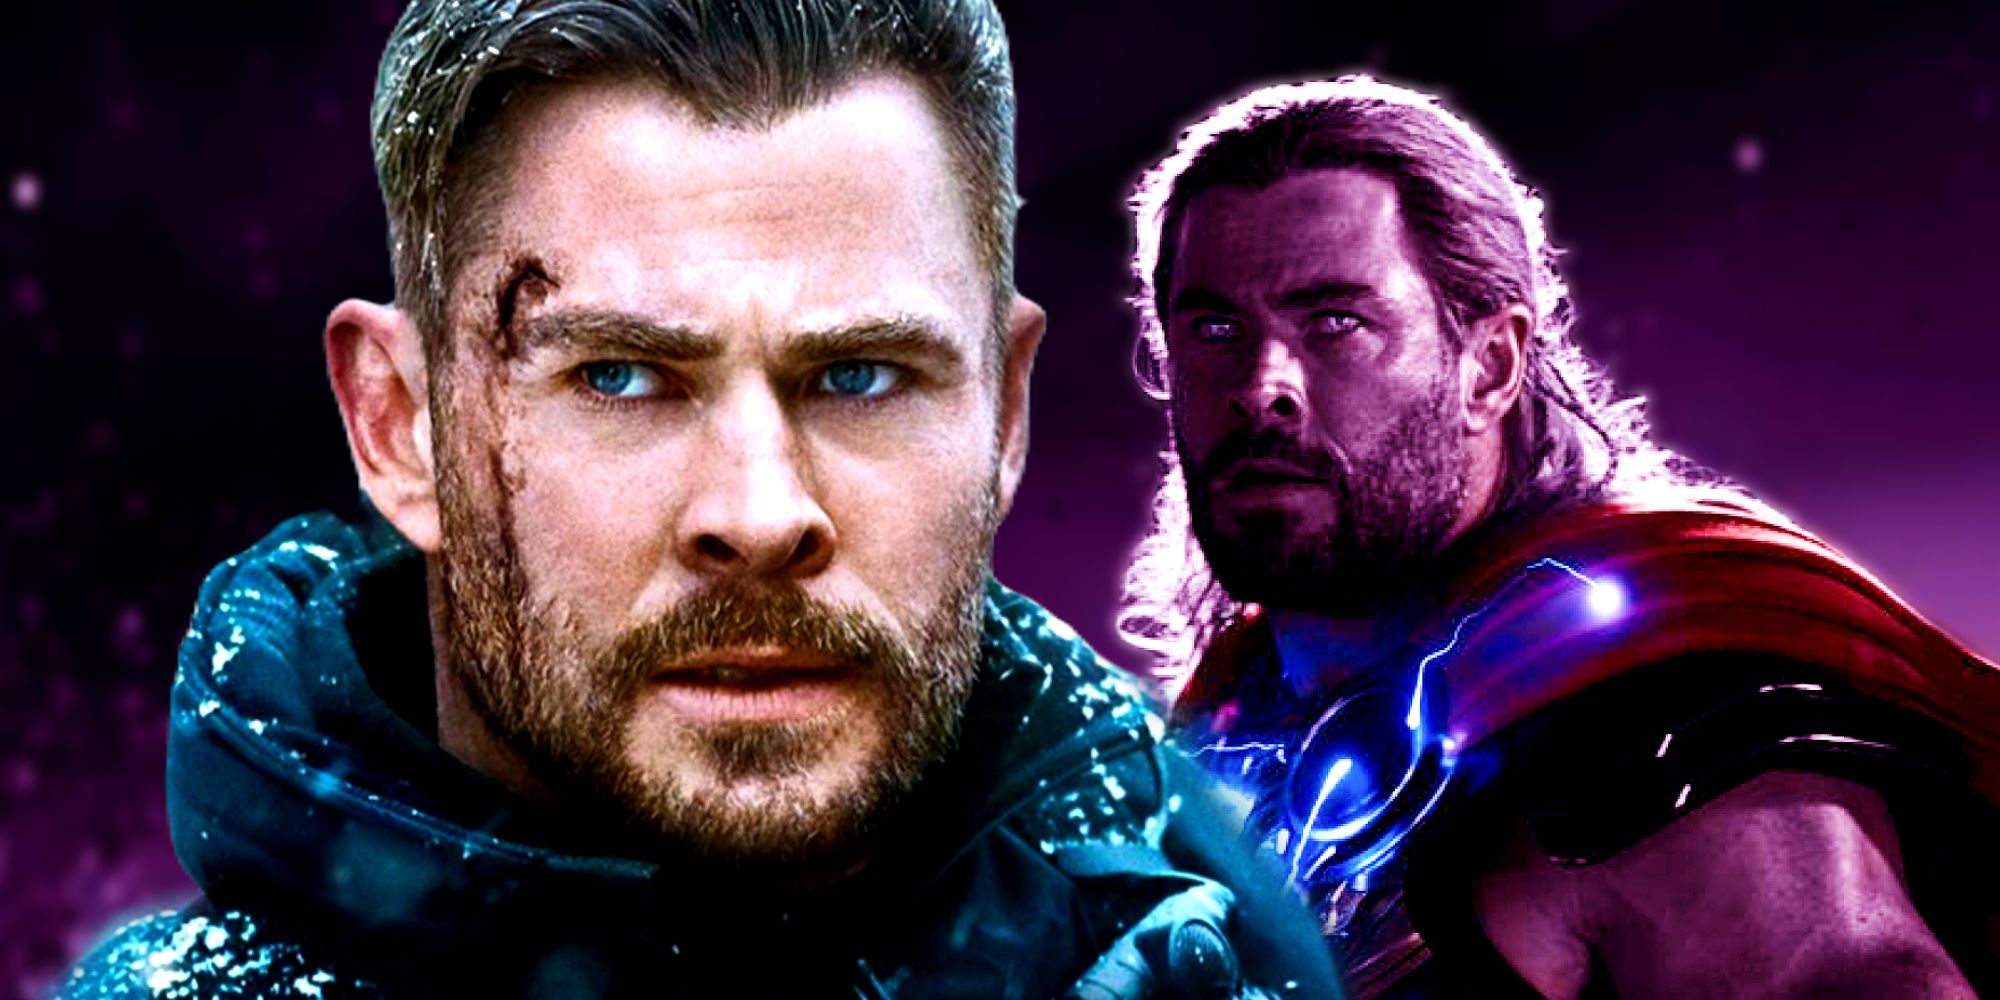 Chris Hemsworth as Thor in the MCU's Love and Thunder and Netflix's Extraction